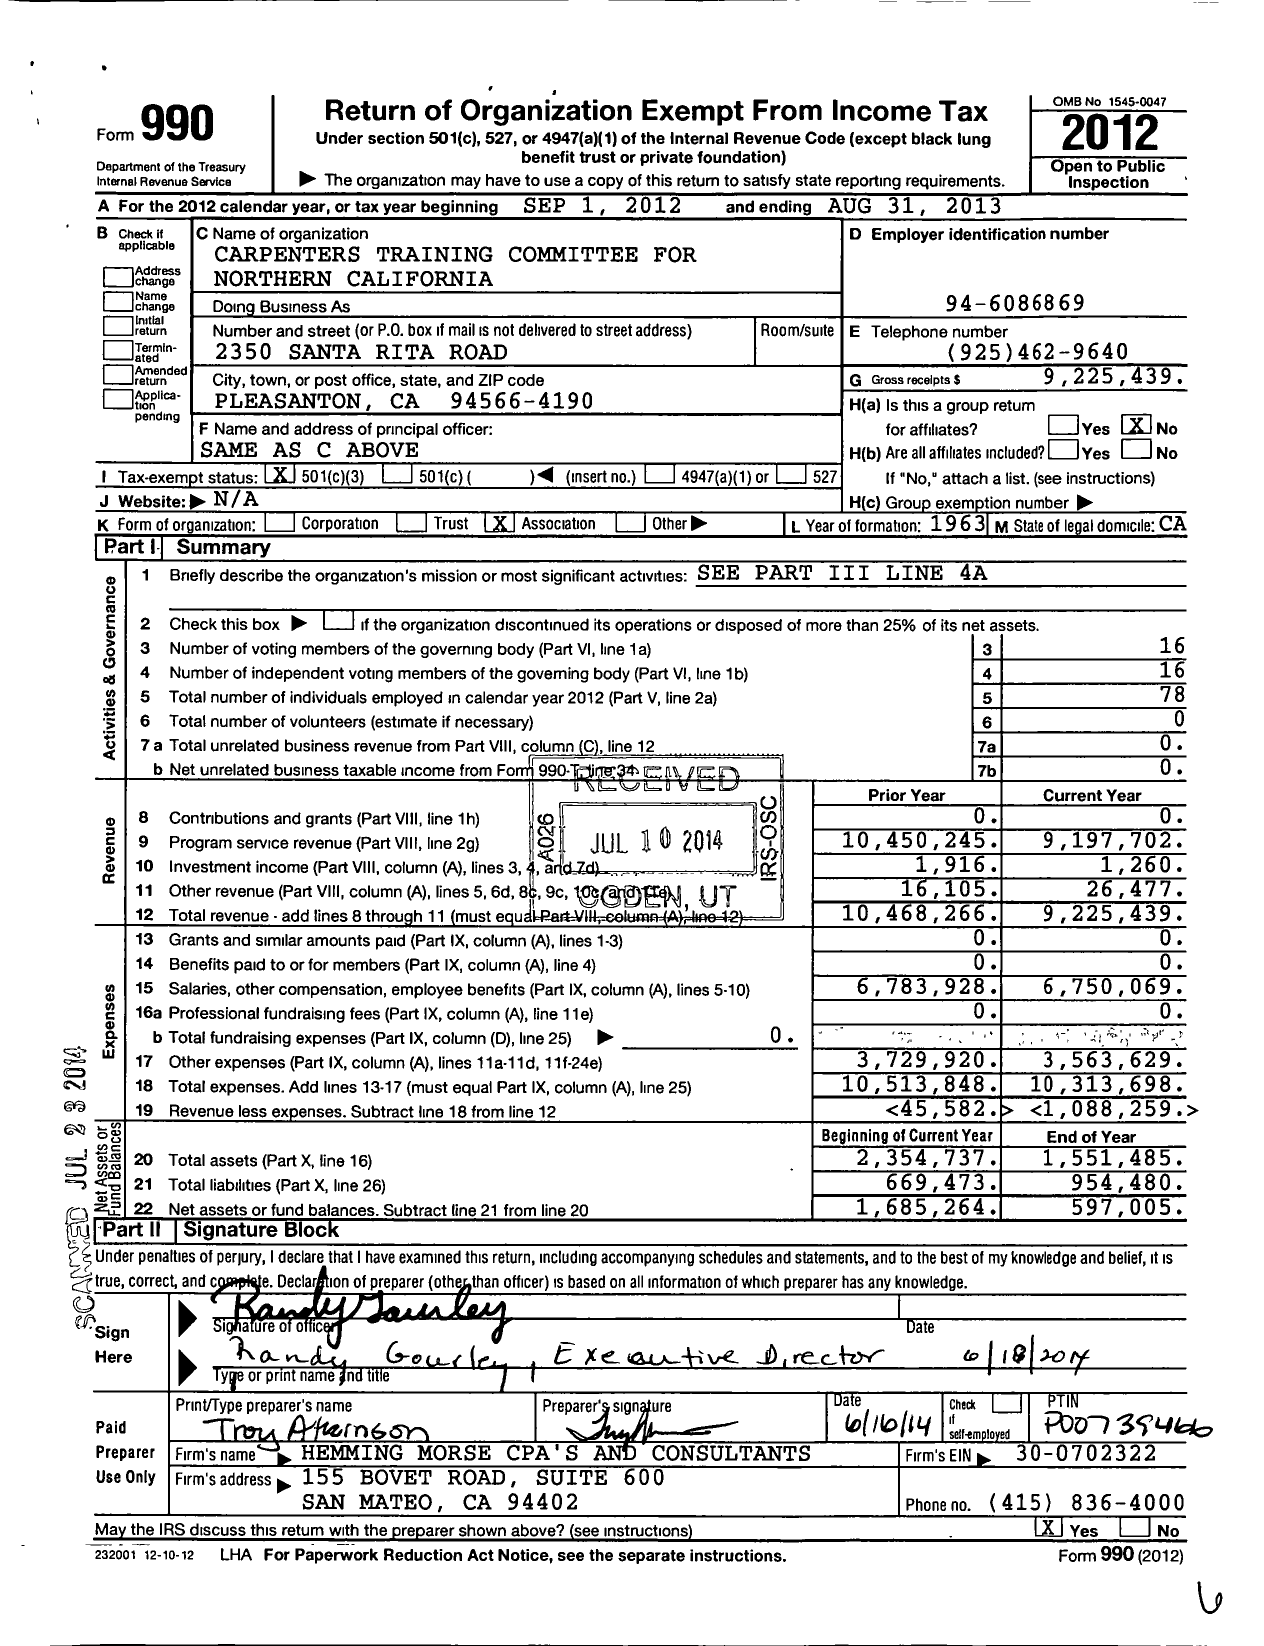 Image of first page of 2012 Form 990 for Carpenters Training Committee for Northern California